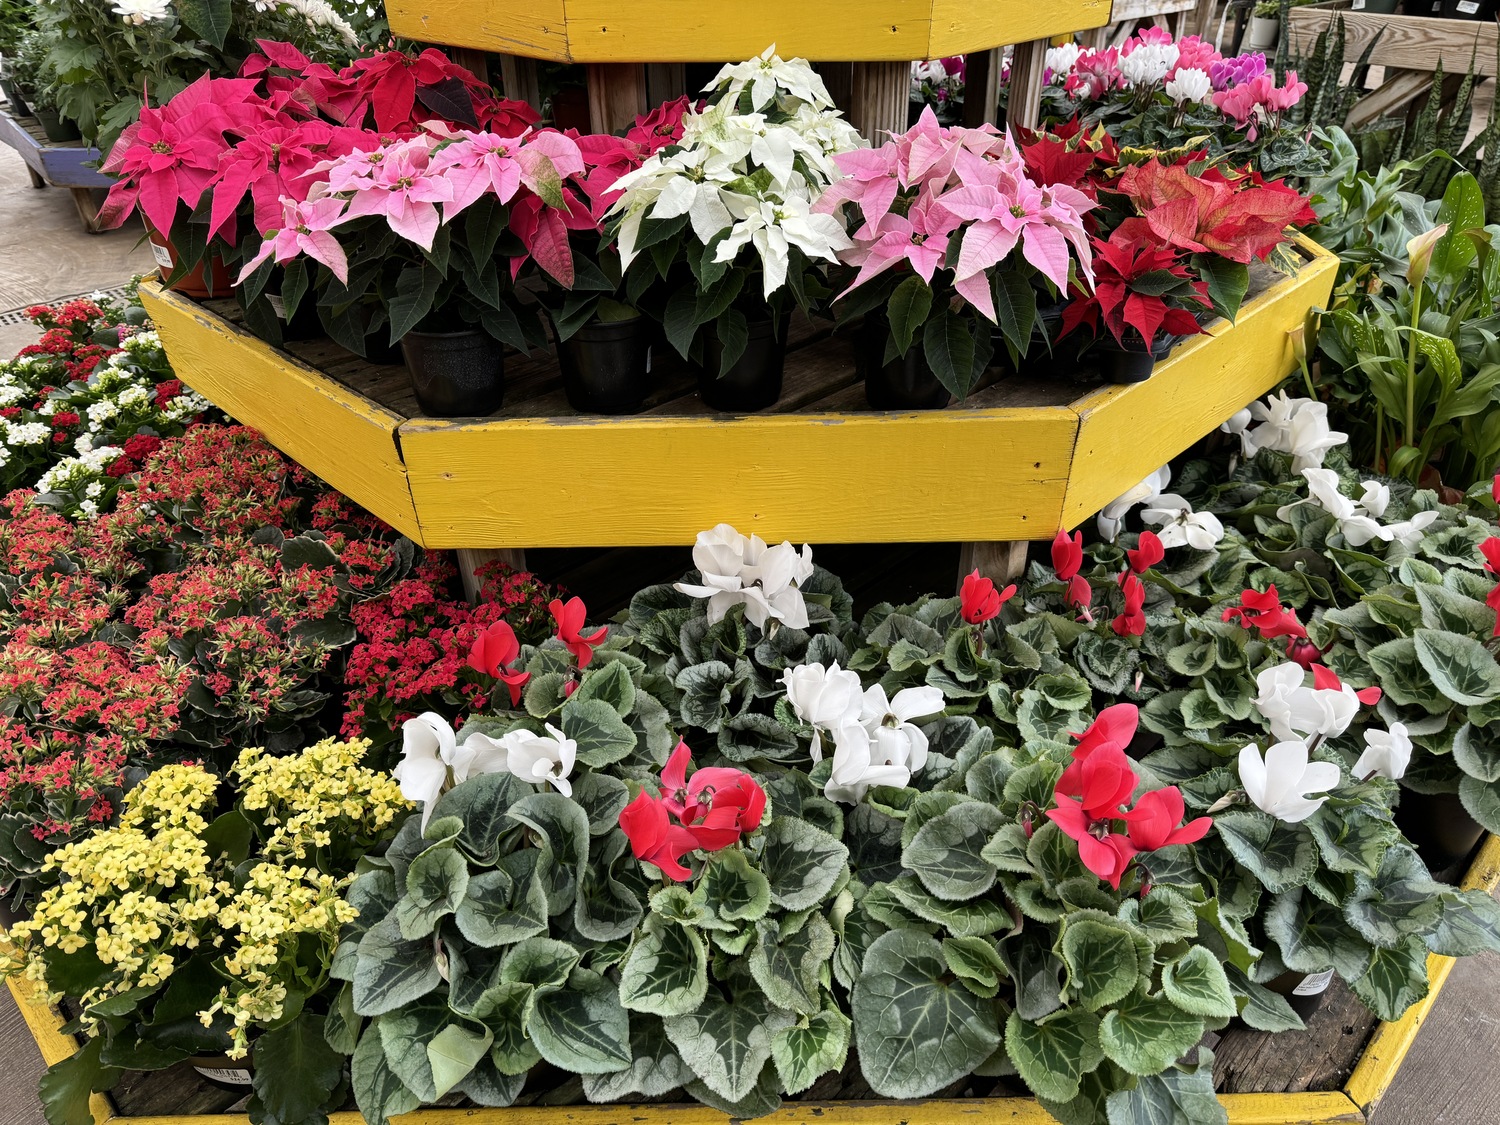 Among the more traditional indoor holiday plant are the poinsettias (top), Kalanchoe (bottom left) and Cyclamen (bottom center). ANDREW MESSINGER